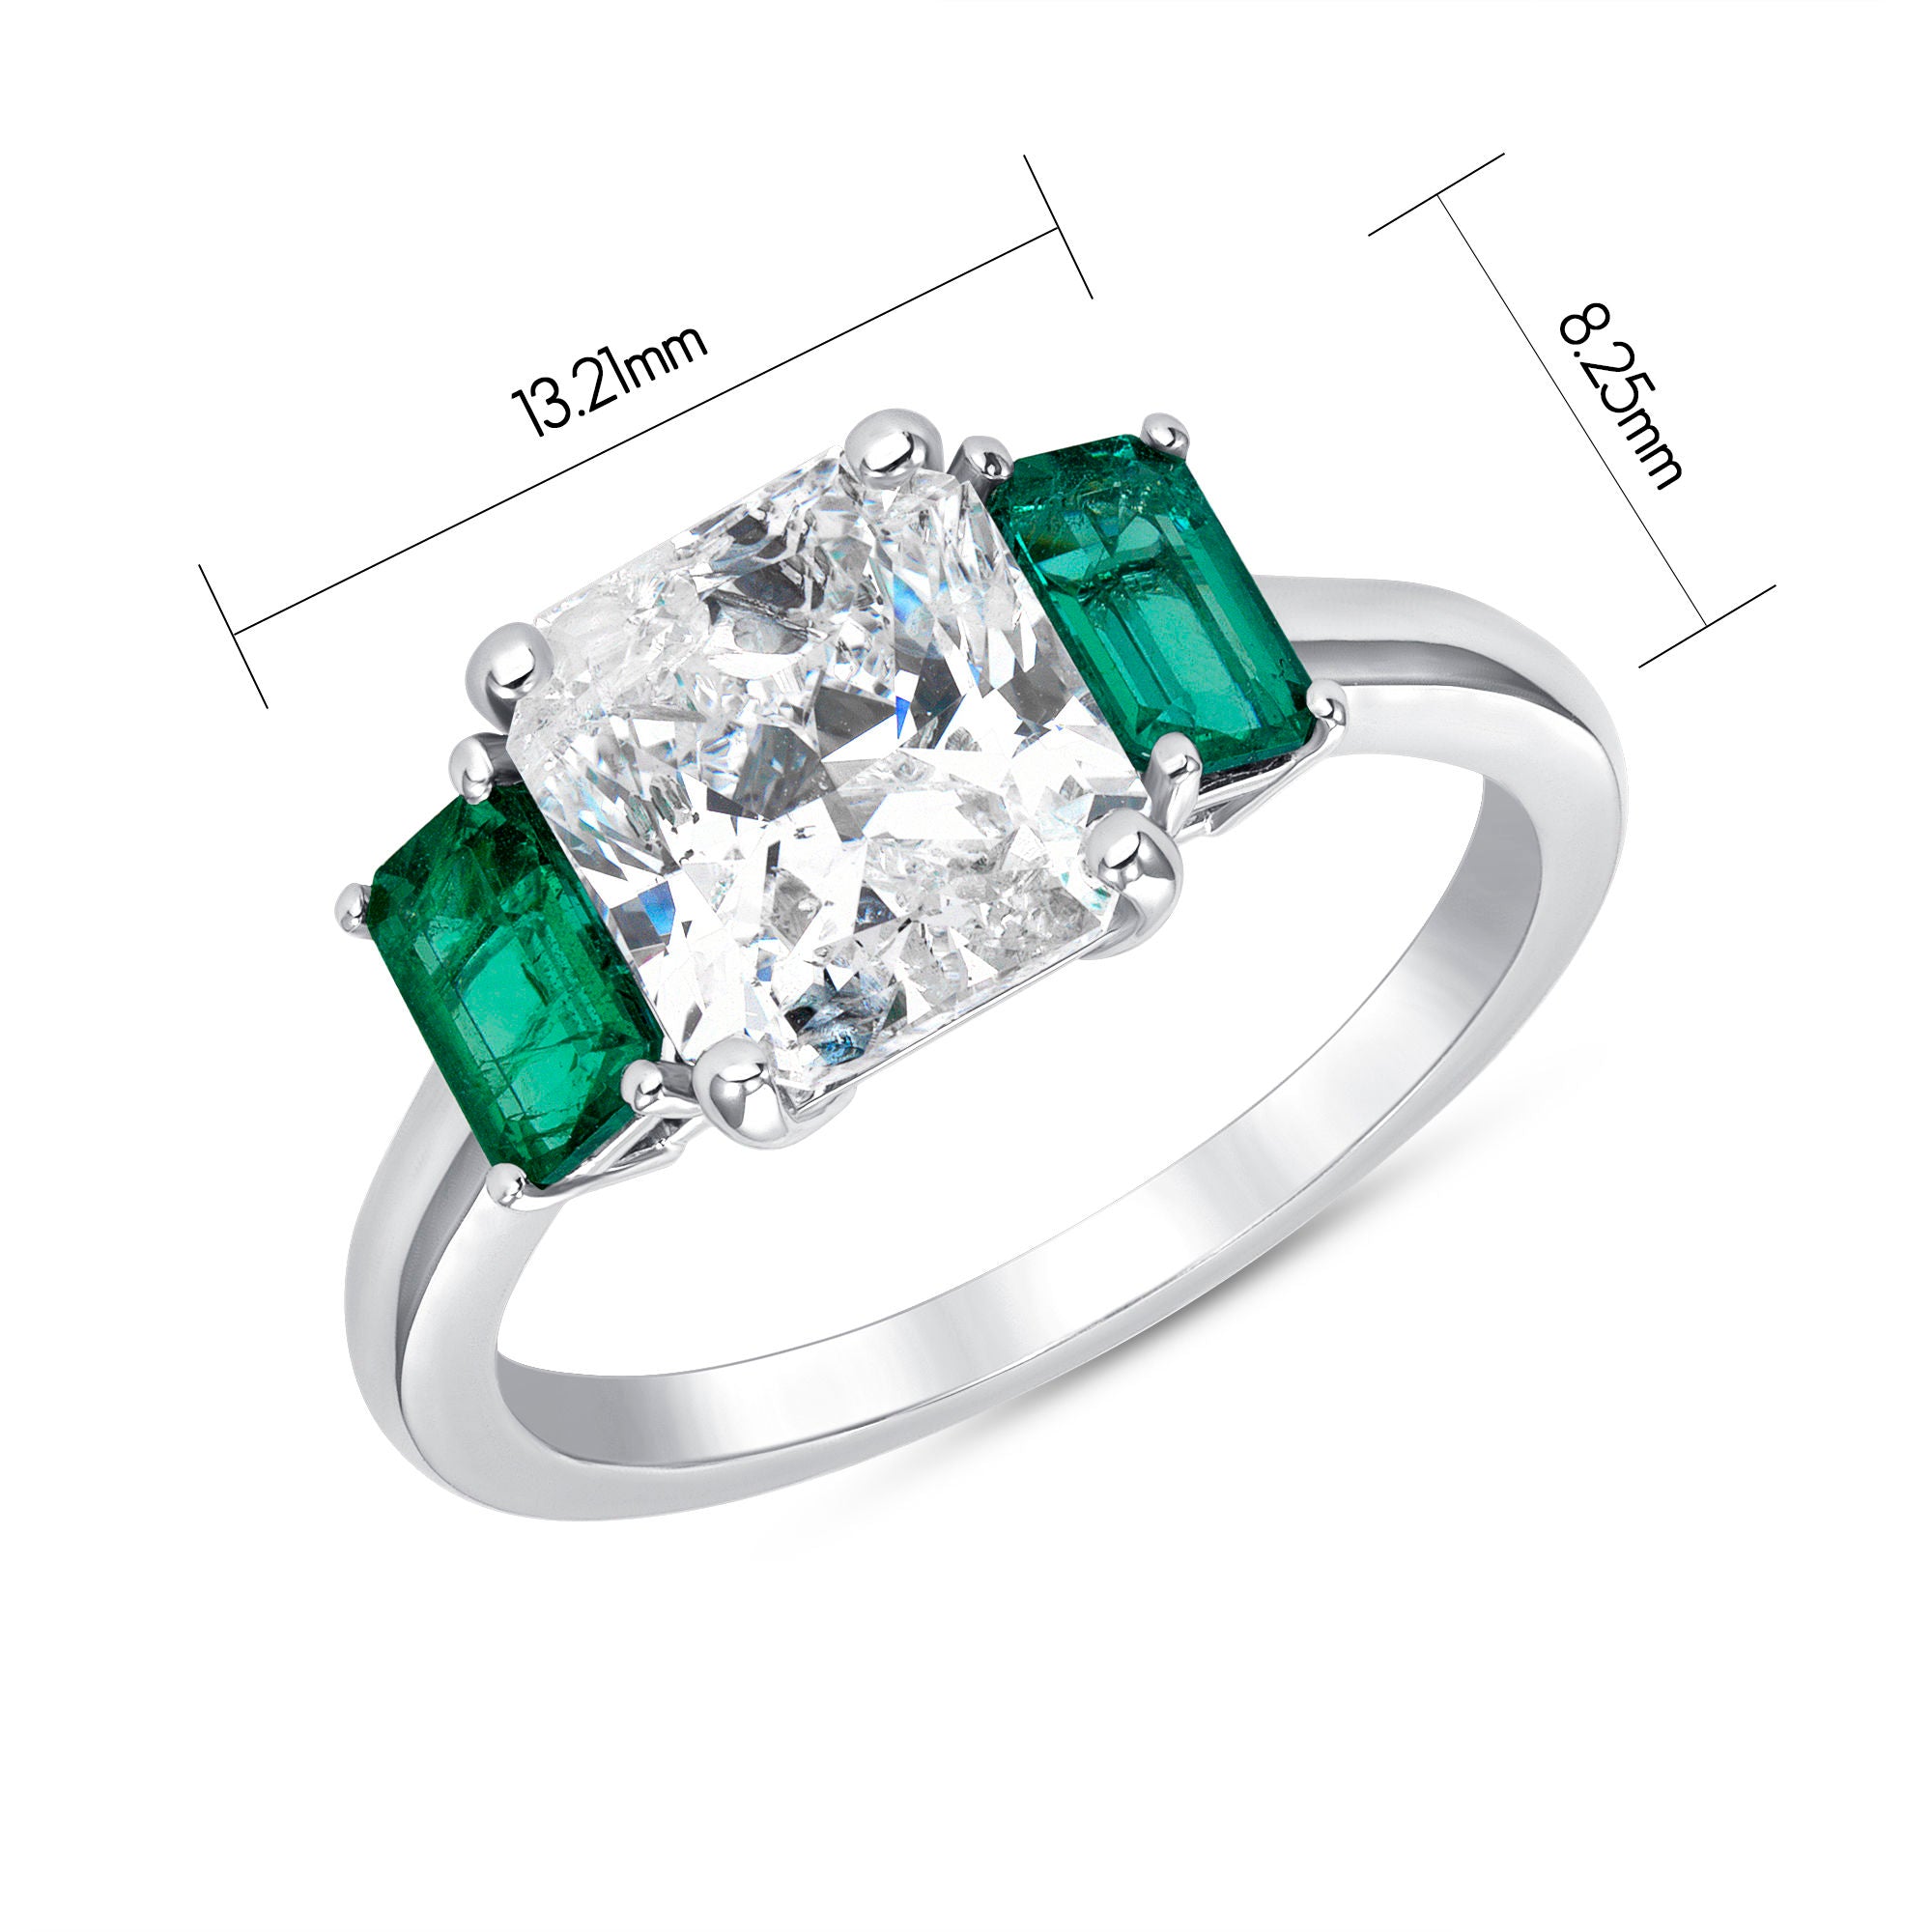 Diamond with Emerald Side Stones Ring - 2.71ct TW